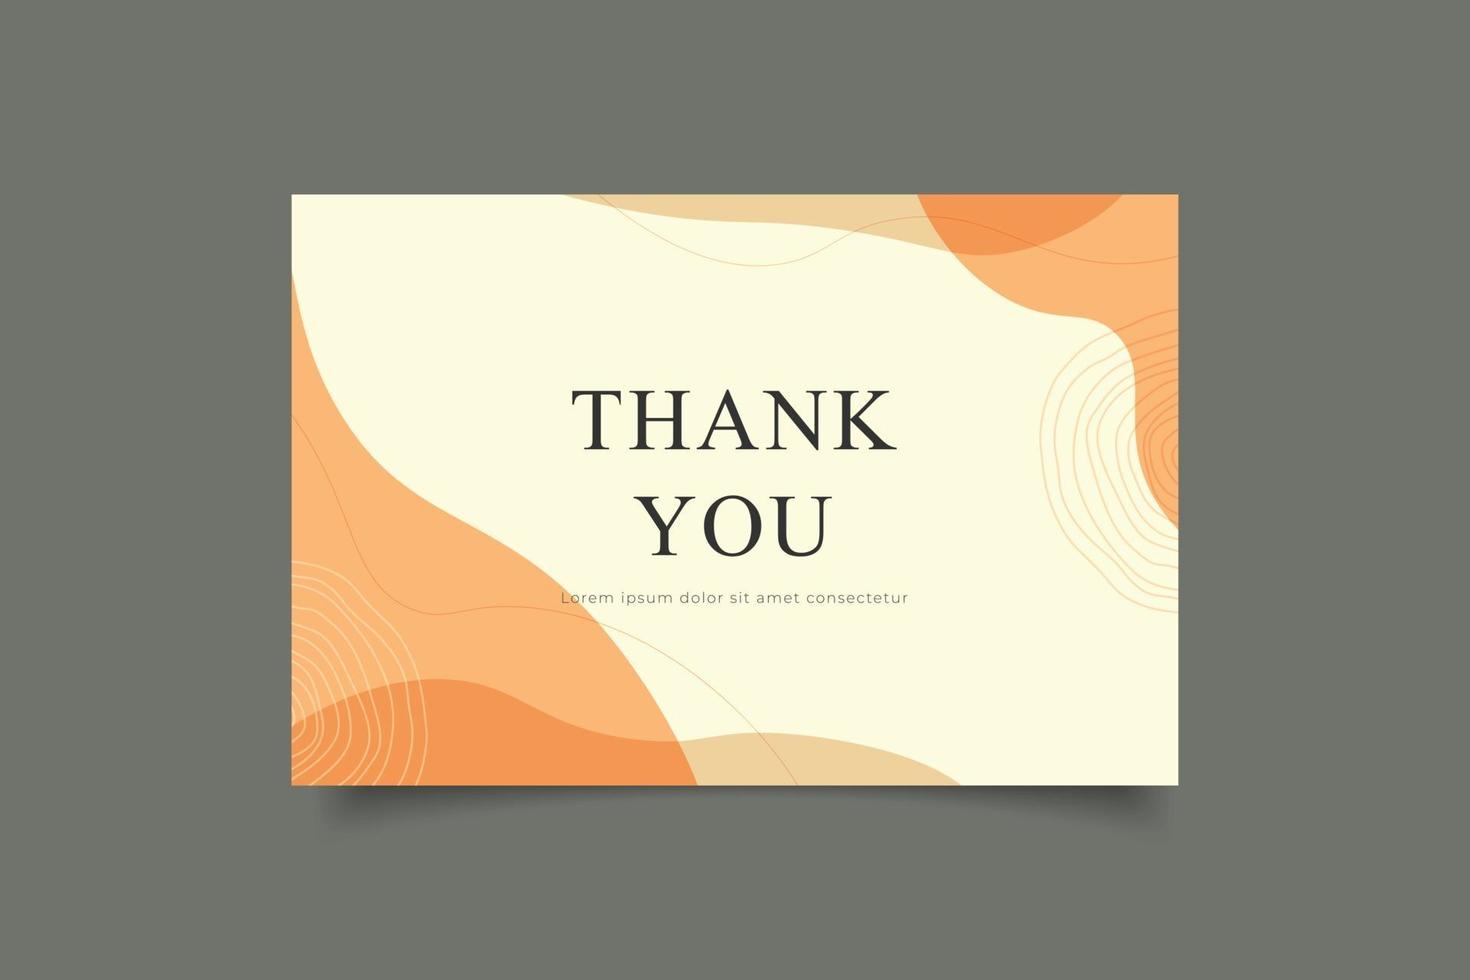 thank you card template with minimalist background vector